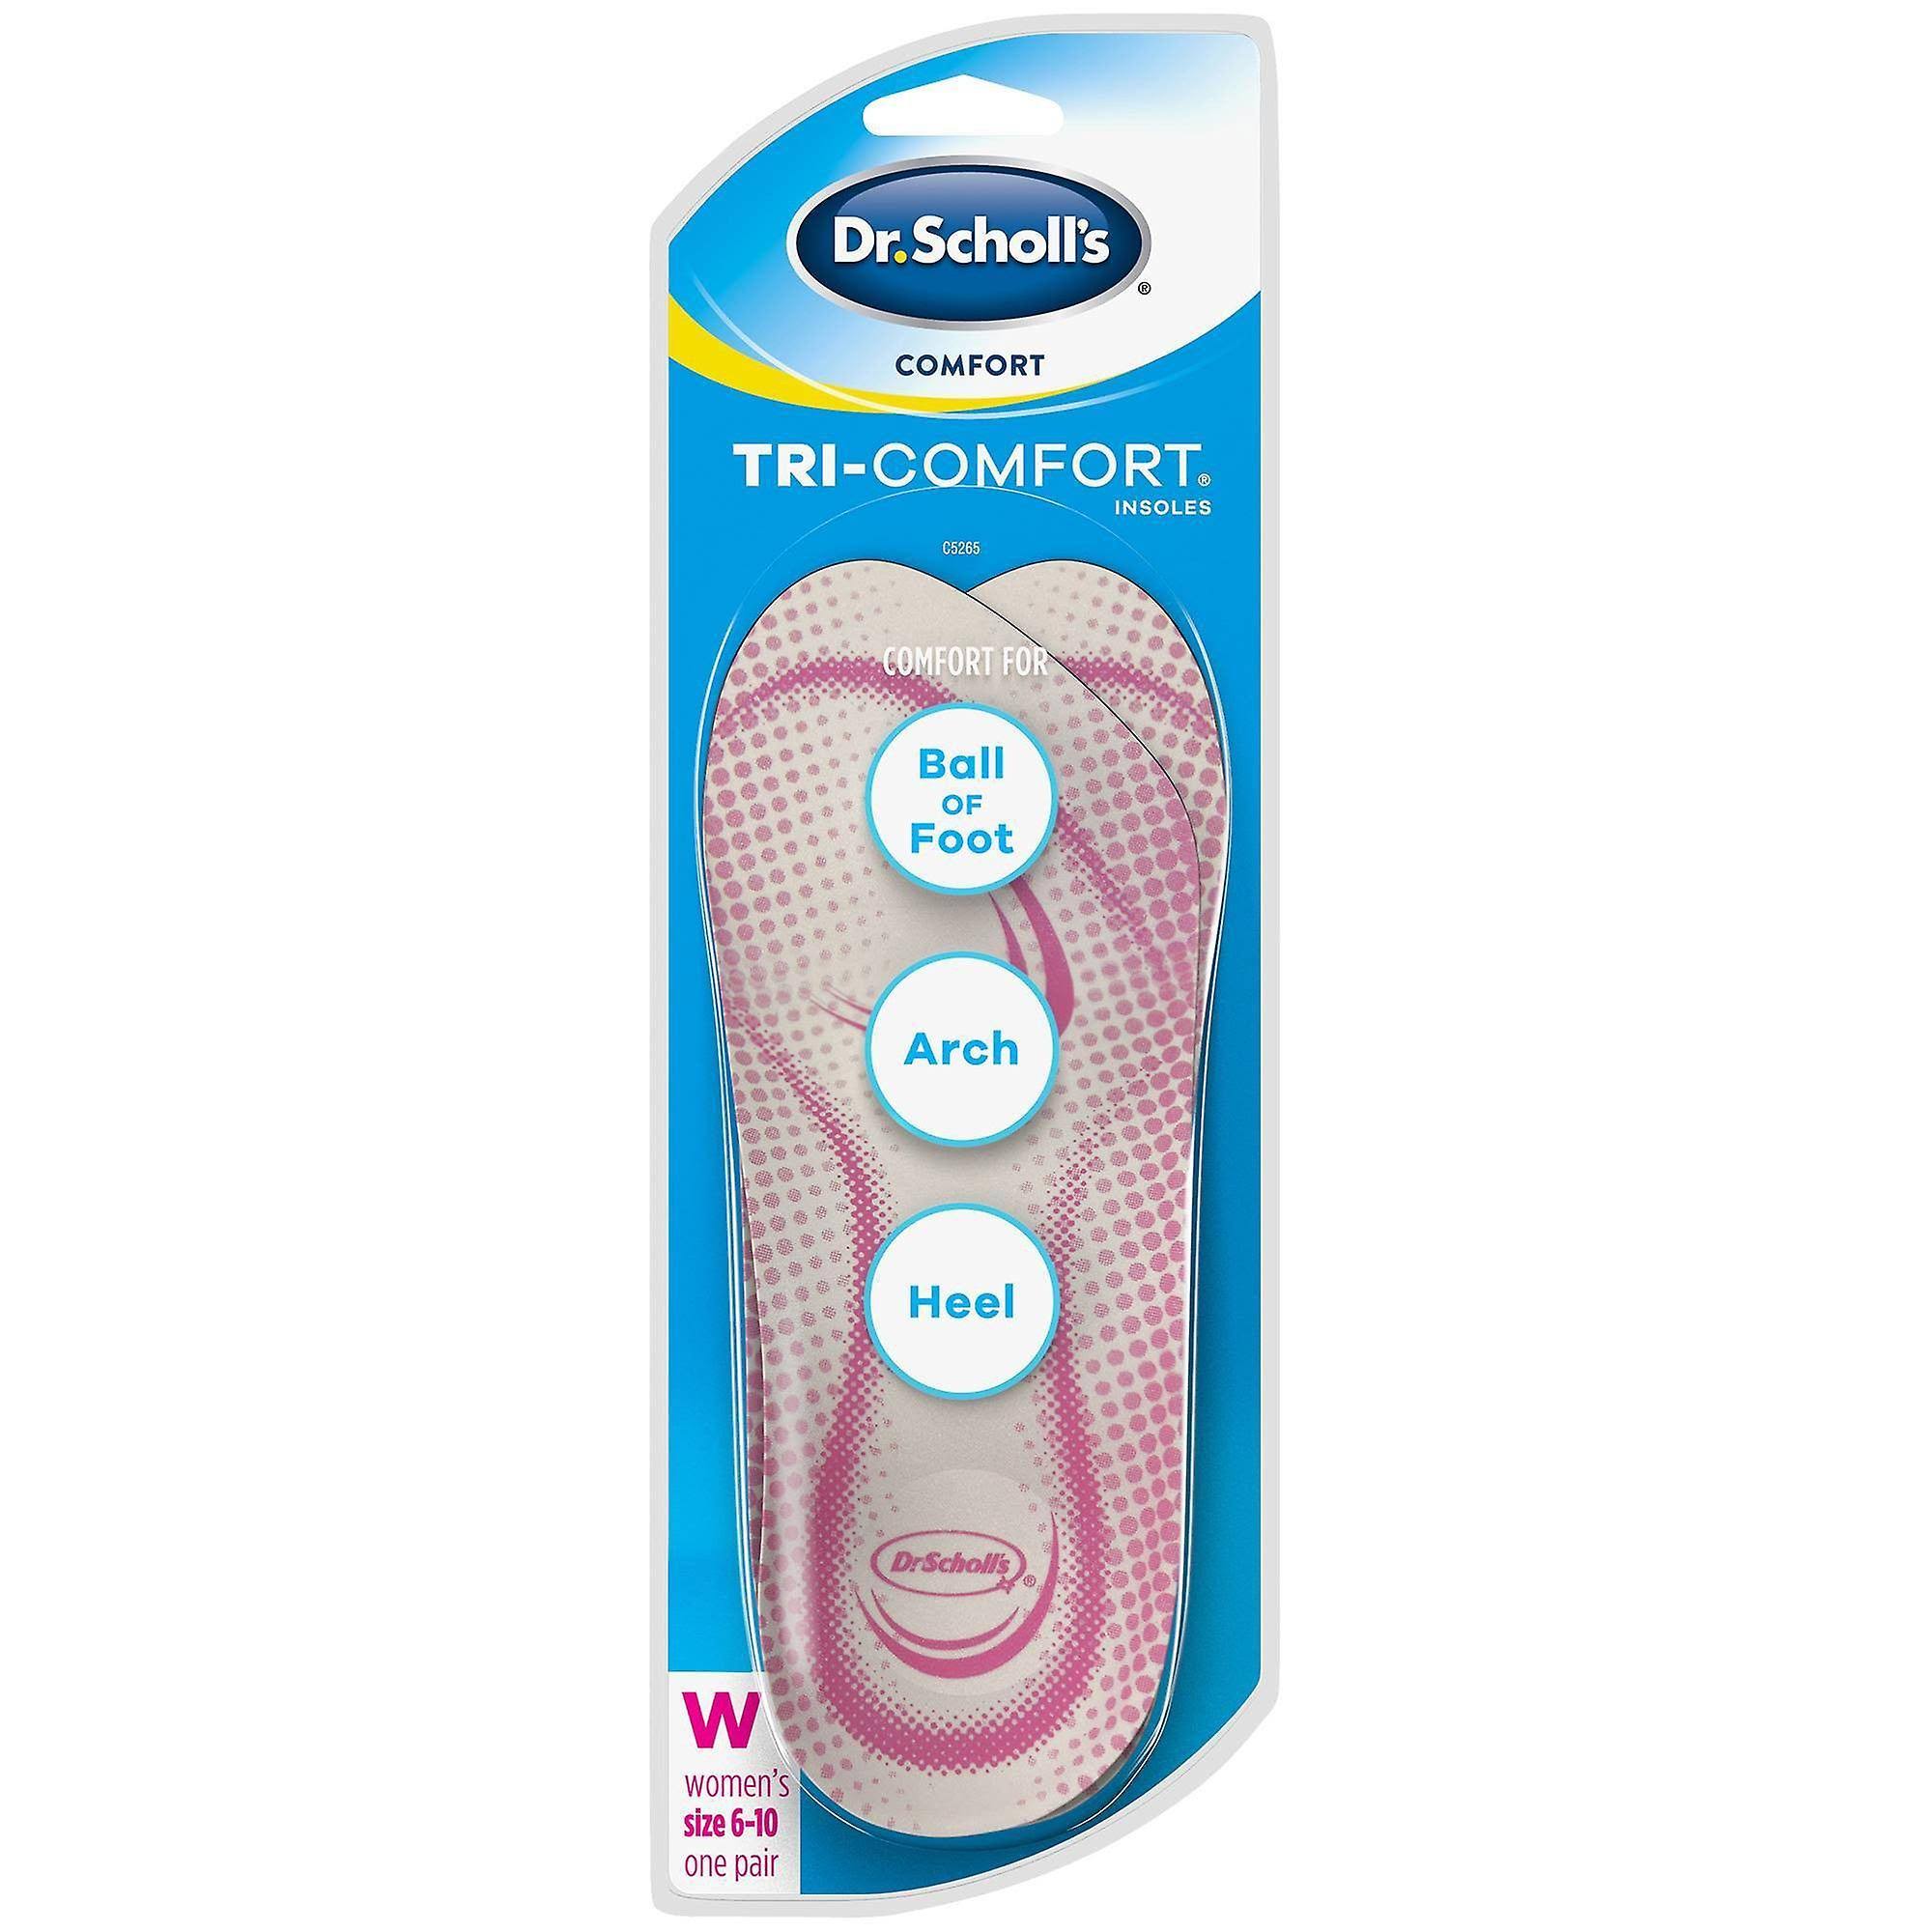 Dr. Scholl's Tri-Comfort Insoles For Women, Size 6-10, 1 Pair